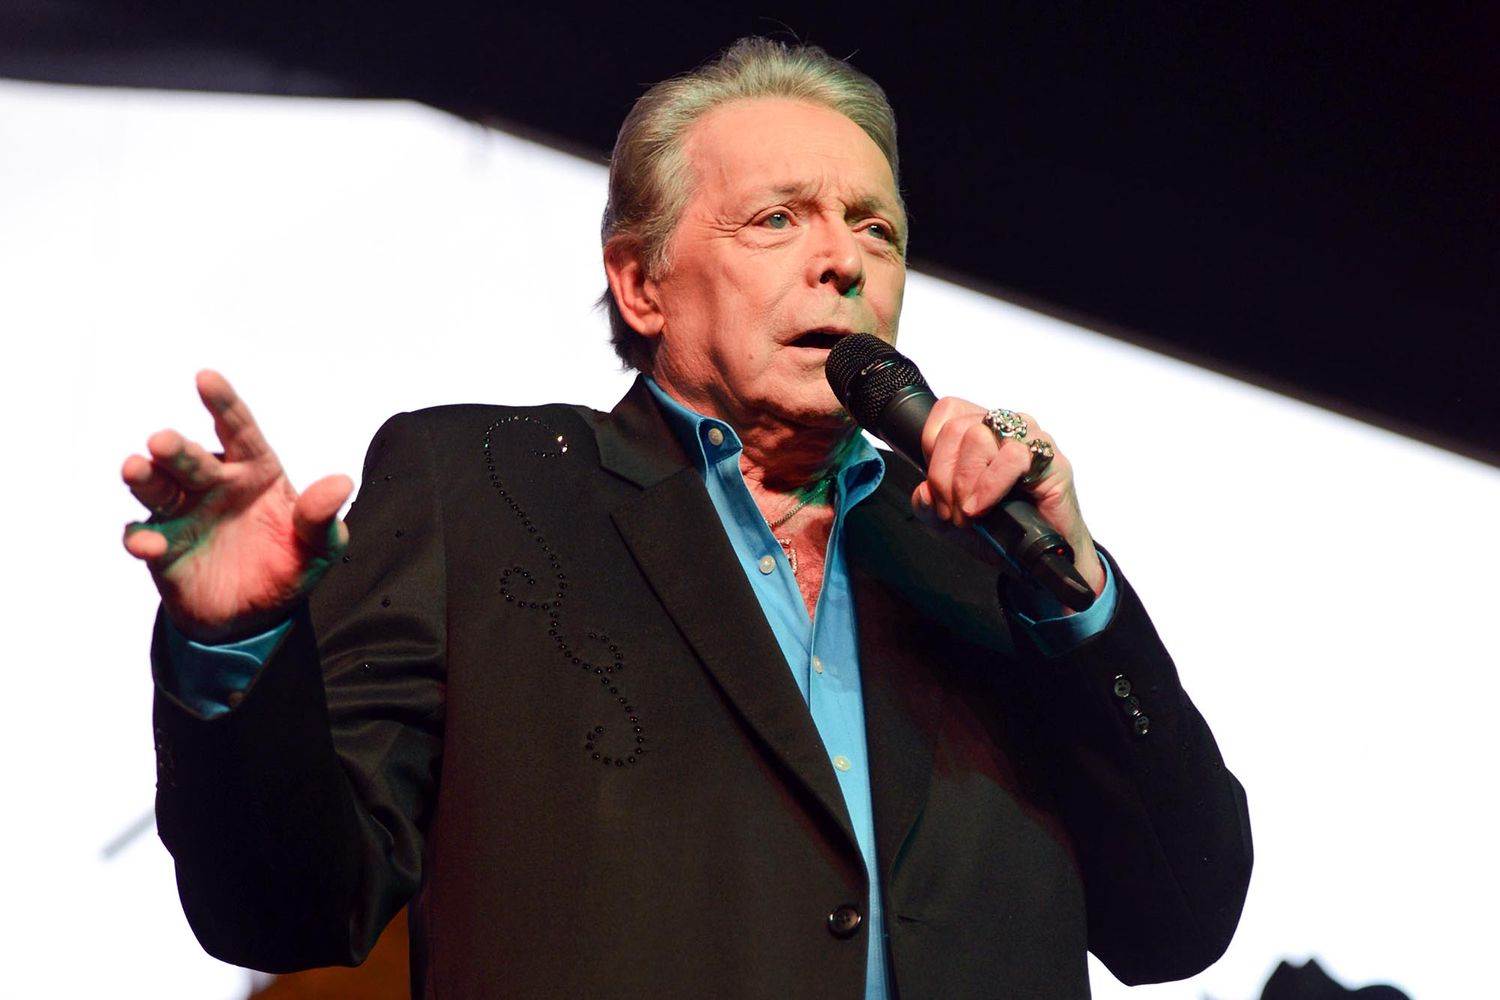 Singer Mickey Gilley performs onstage during day 2 of the Stagecoach Music Festival at The Empire Polo Club on April 25, 2015 in Indio, California.